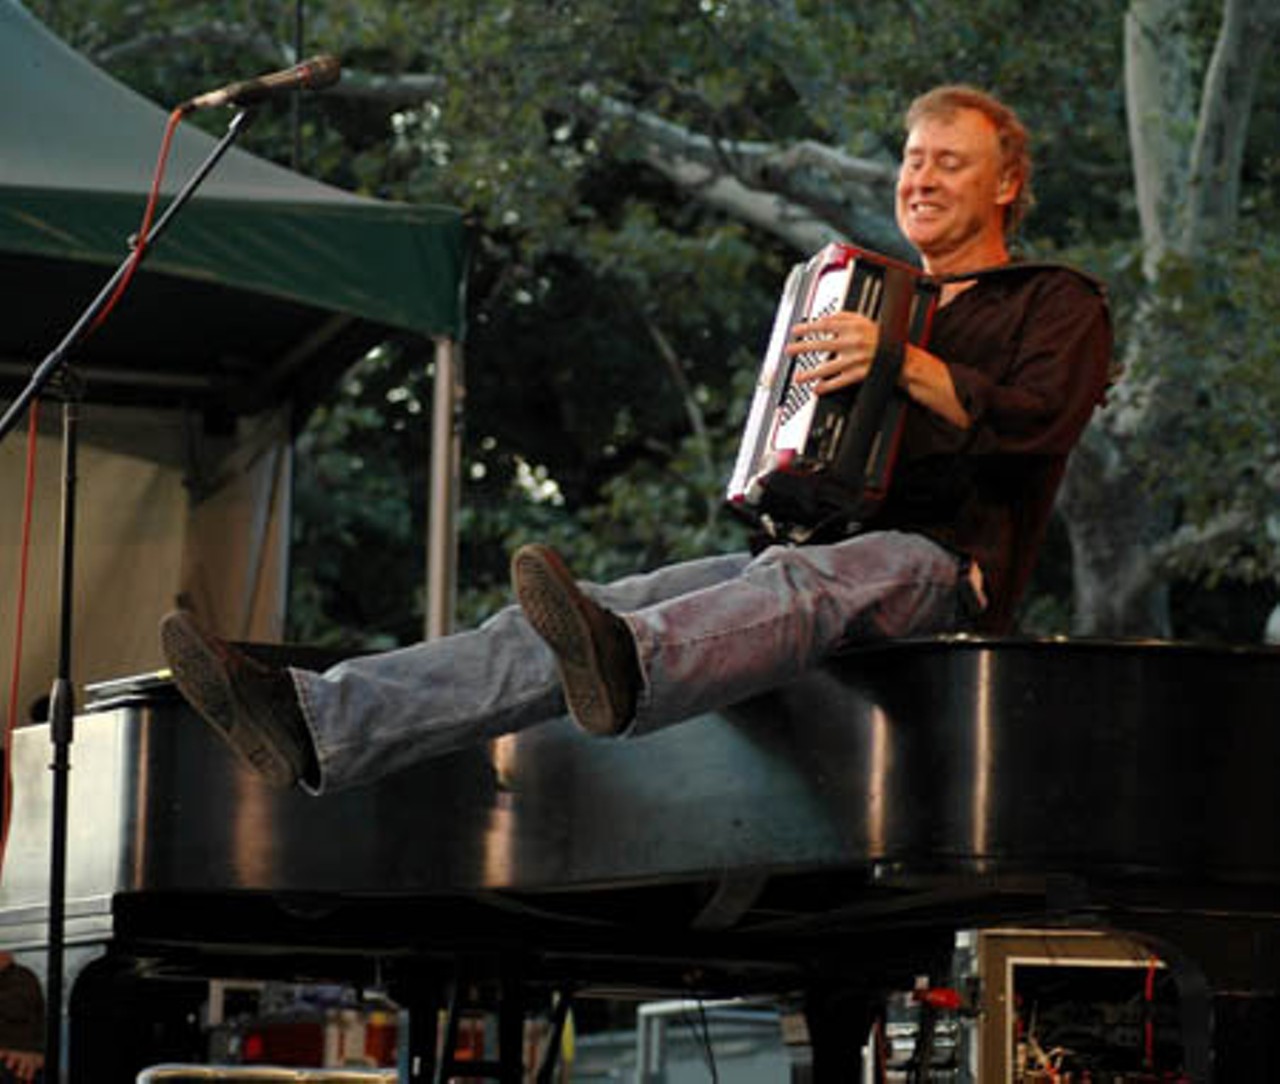 At the moment, singer-songwriter Bruce Hornsby is on the road promoting a new collection called Solo Concerts that goes far beyond the usual scope of a traditional live album that might simply collect a series of tracks from various concerts. Instead, with Solo Concerts, Hornsby paints a very distinct narrative and the way that the material is laid out, sans any sort of dialogue between the songs, makes it clear that Hornsby had an aim to assemble something that would play properly as an album, taking its listeners on a specifically curated journey. If you catch tonight's return visit to the Kent Stage, you'll see that’s what it’s all about — an evening of music that aims to offer a bit of education while triggering a wide range of emotions. Light-hearted stage conversation from Hornsby in between each song ties it all together and the unpredictable nature of each show makes it a night on the town that’s well worth venturing out to see. Tonight's show begins at 8 p.m. (Matt Wardlaw)